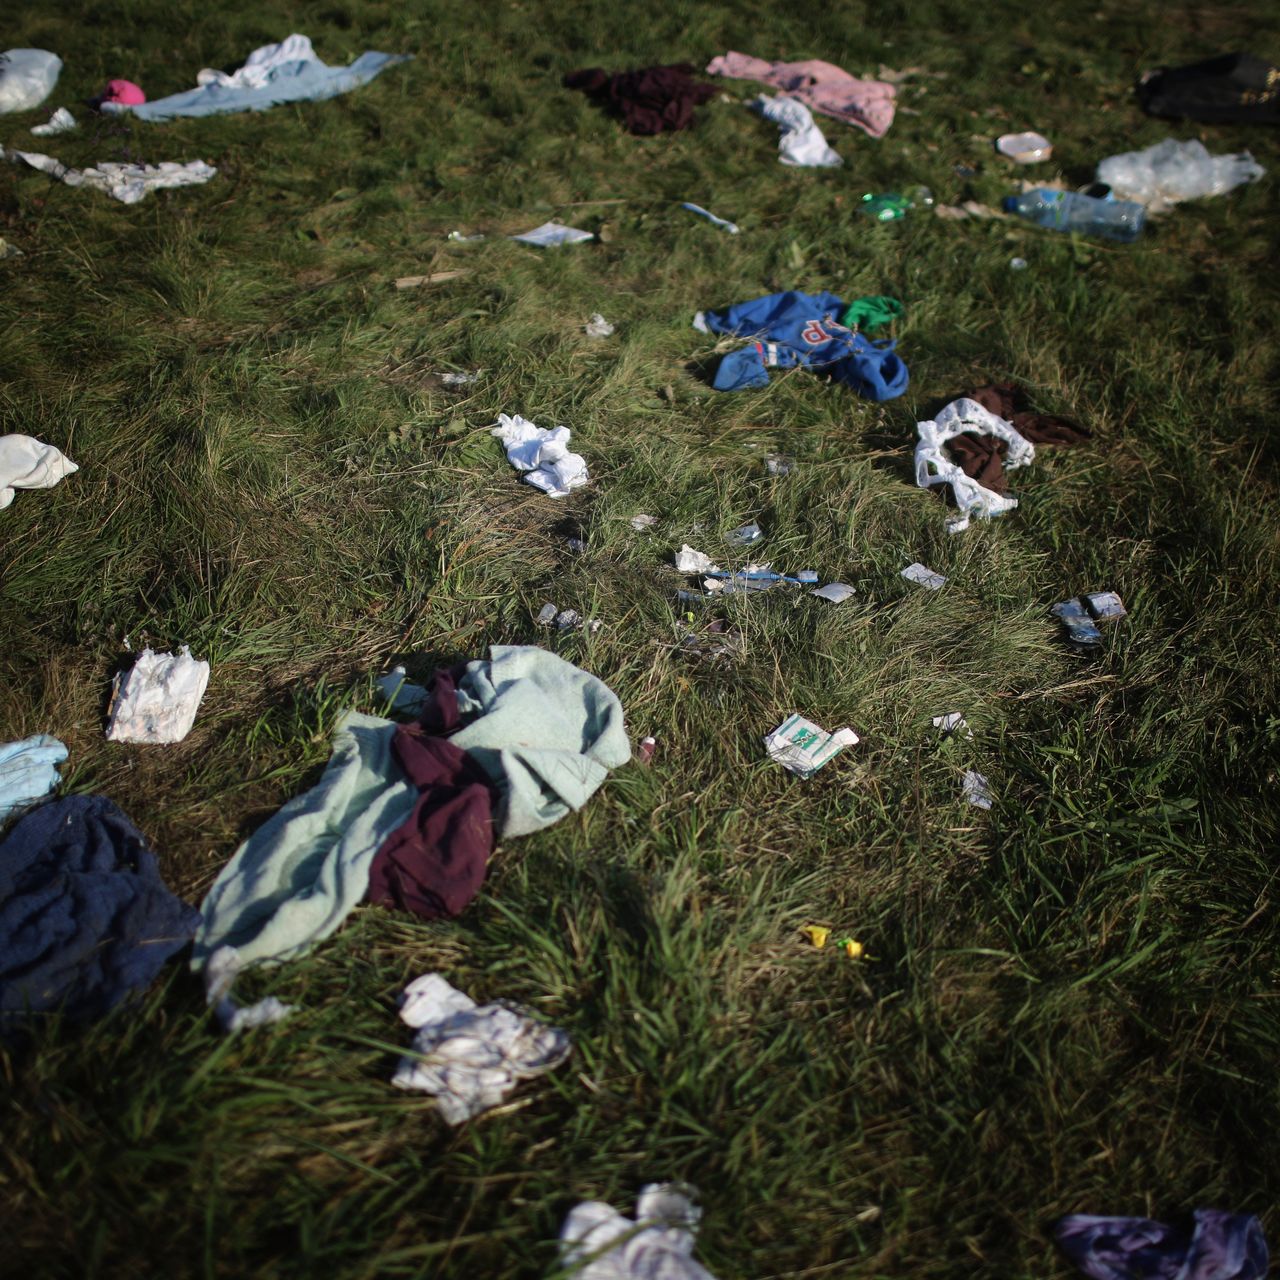 Clothing left behind in the grass. 